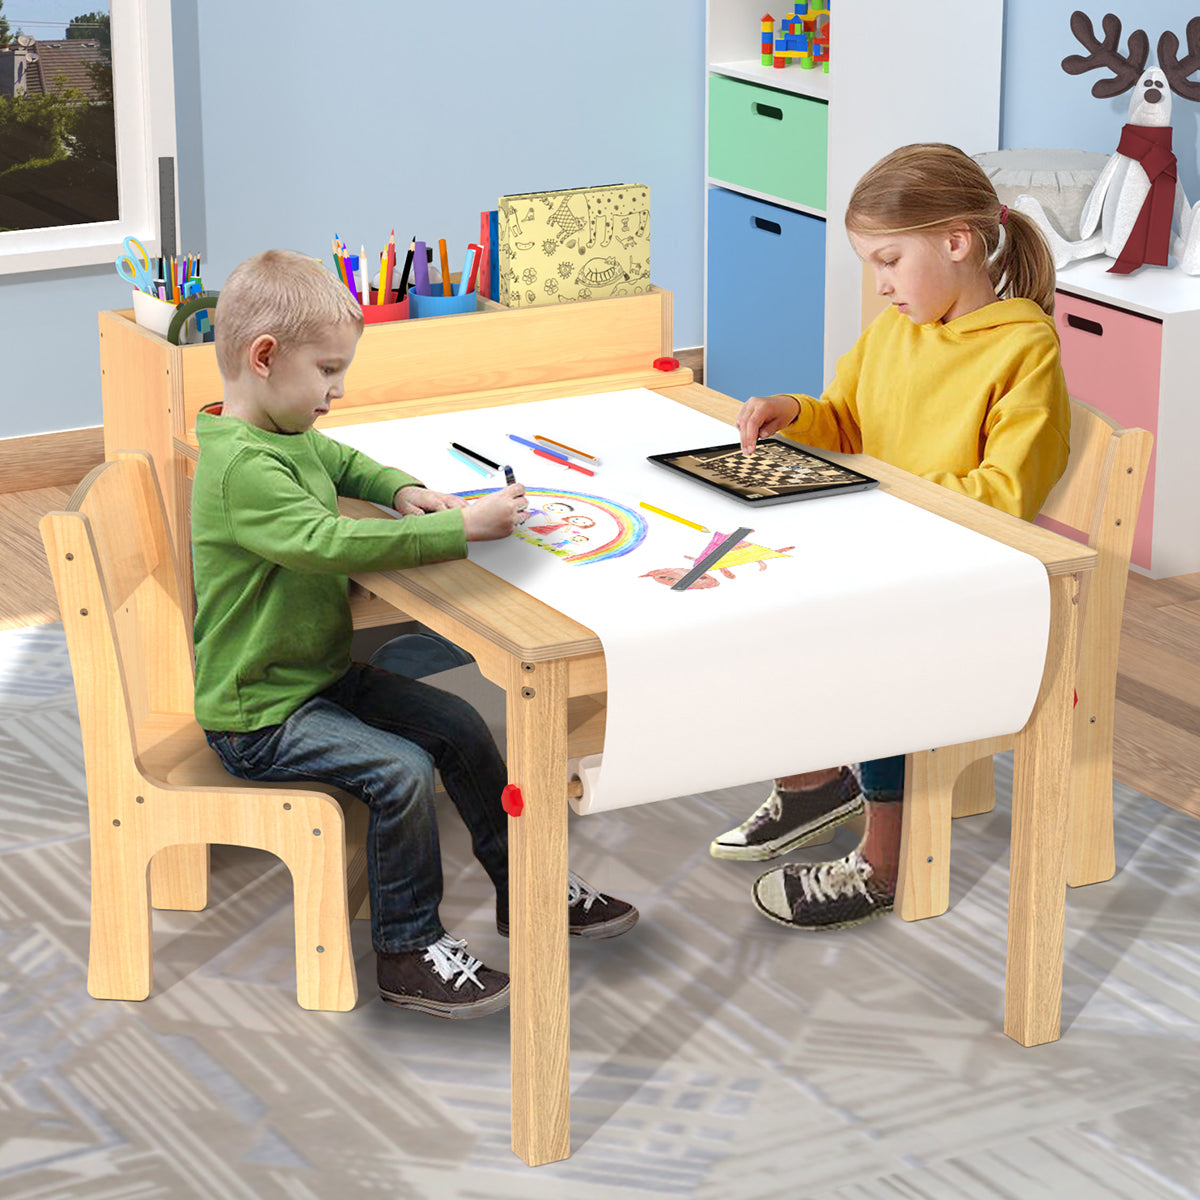 Kids Art Table and Chairs Set Craft Table with Large Storage Desk